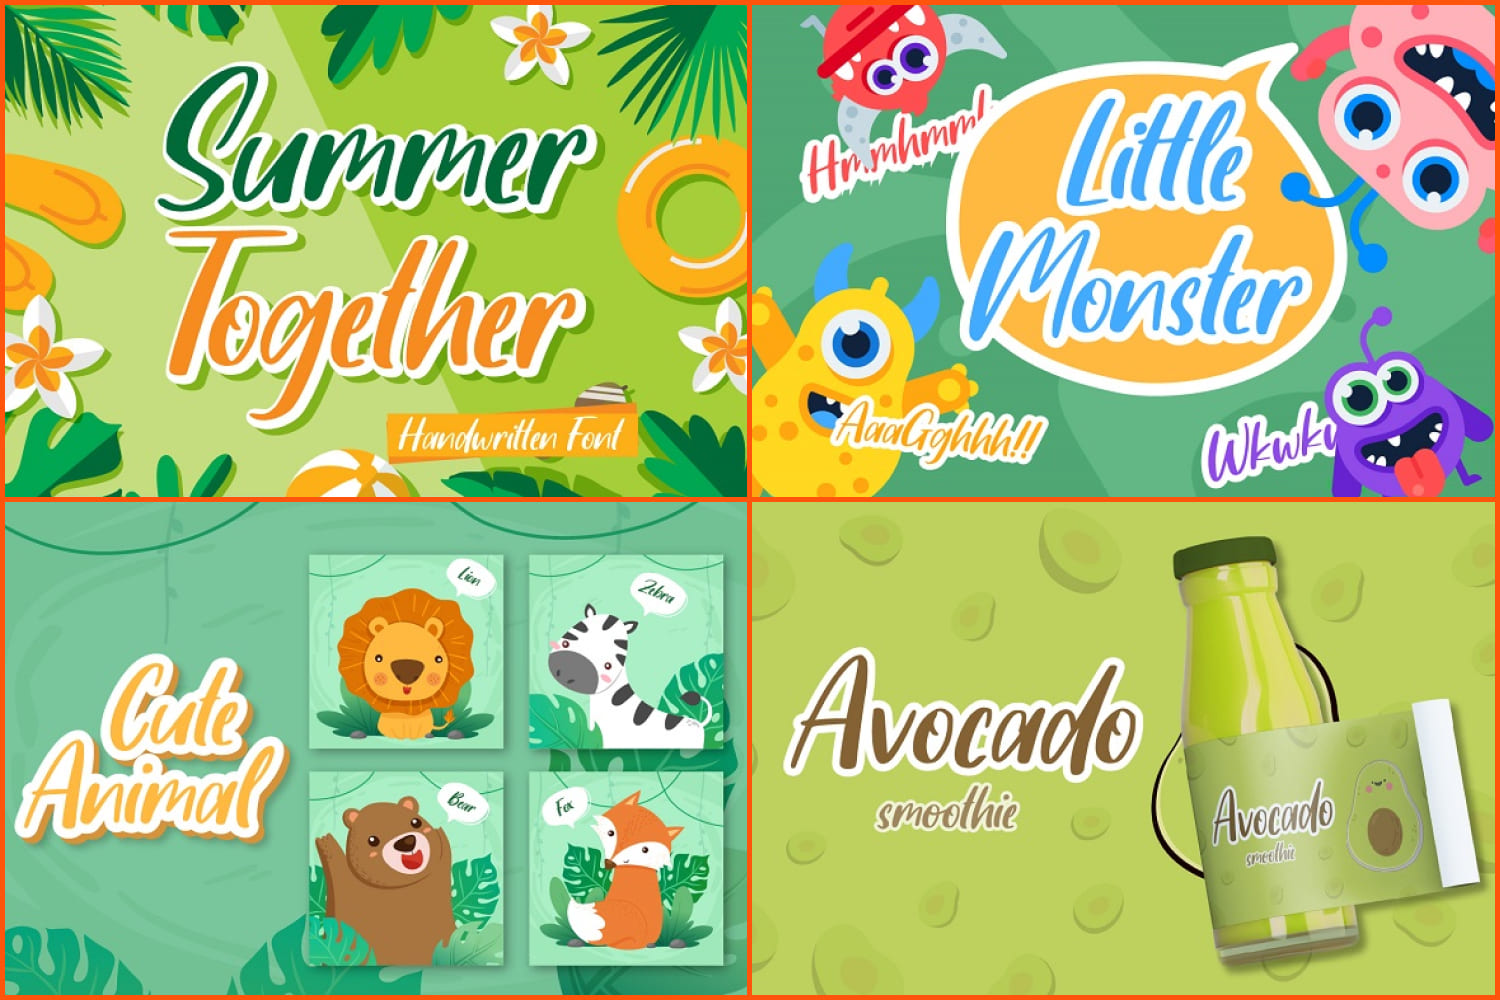 Collage of four drawings with colorful text on a green background.